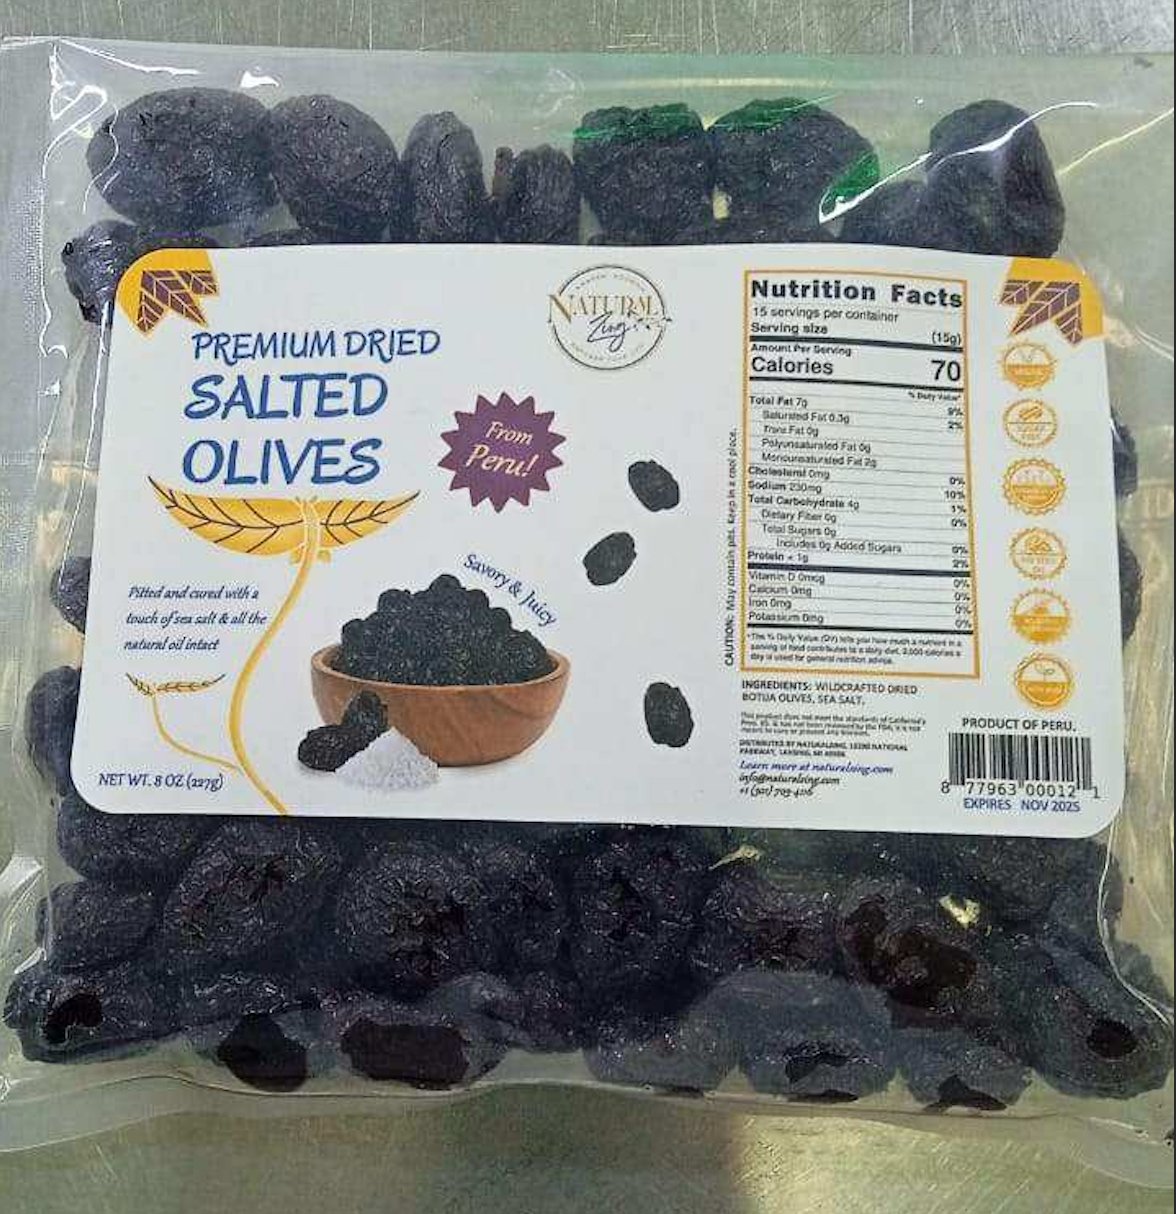 Peruvian Black Dried Olives (Salted, Pitted) 8 oz, Case of 14 - Natural Zing